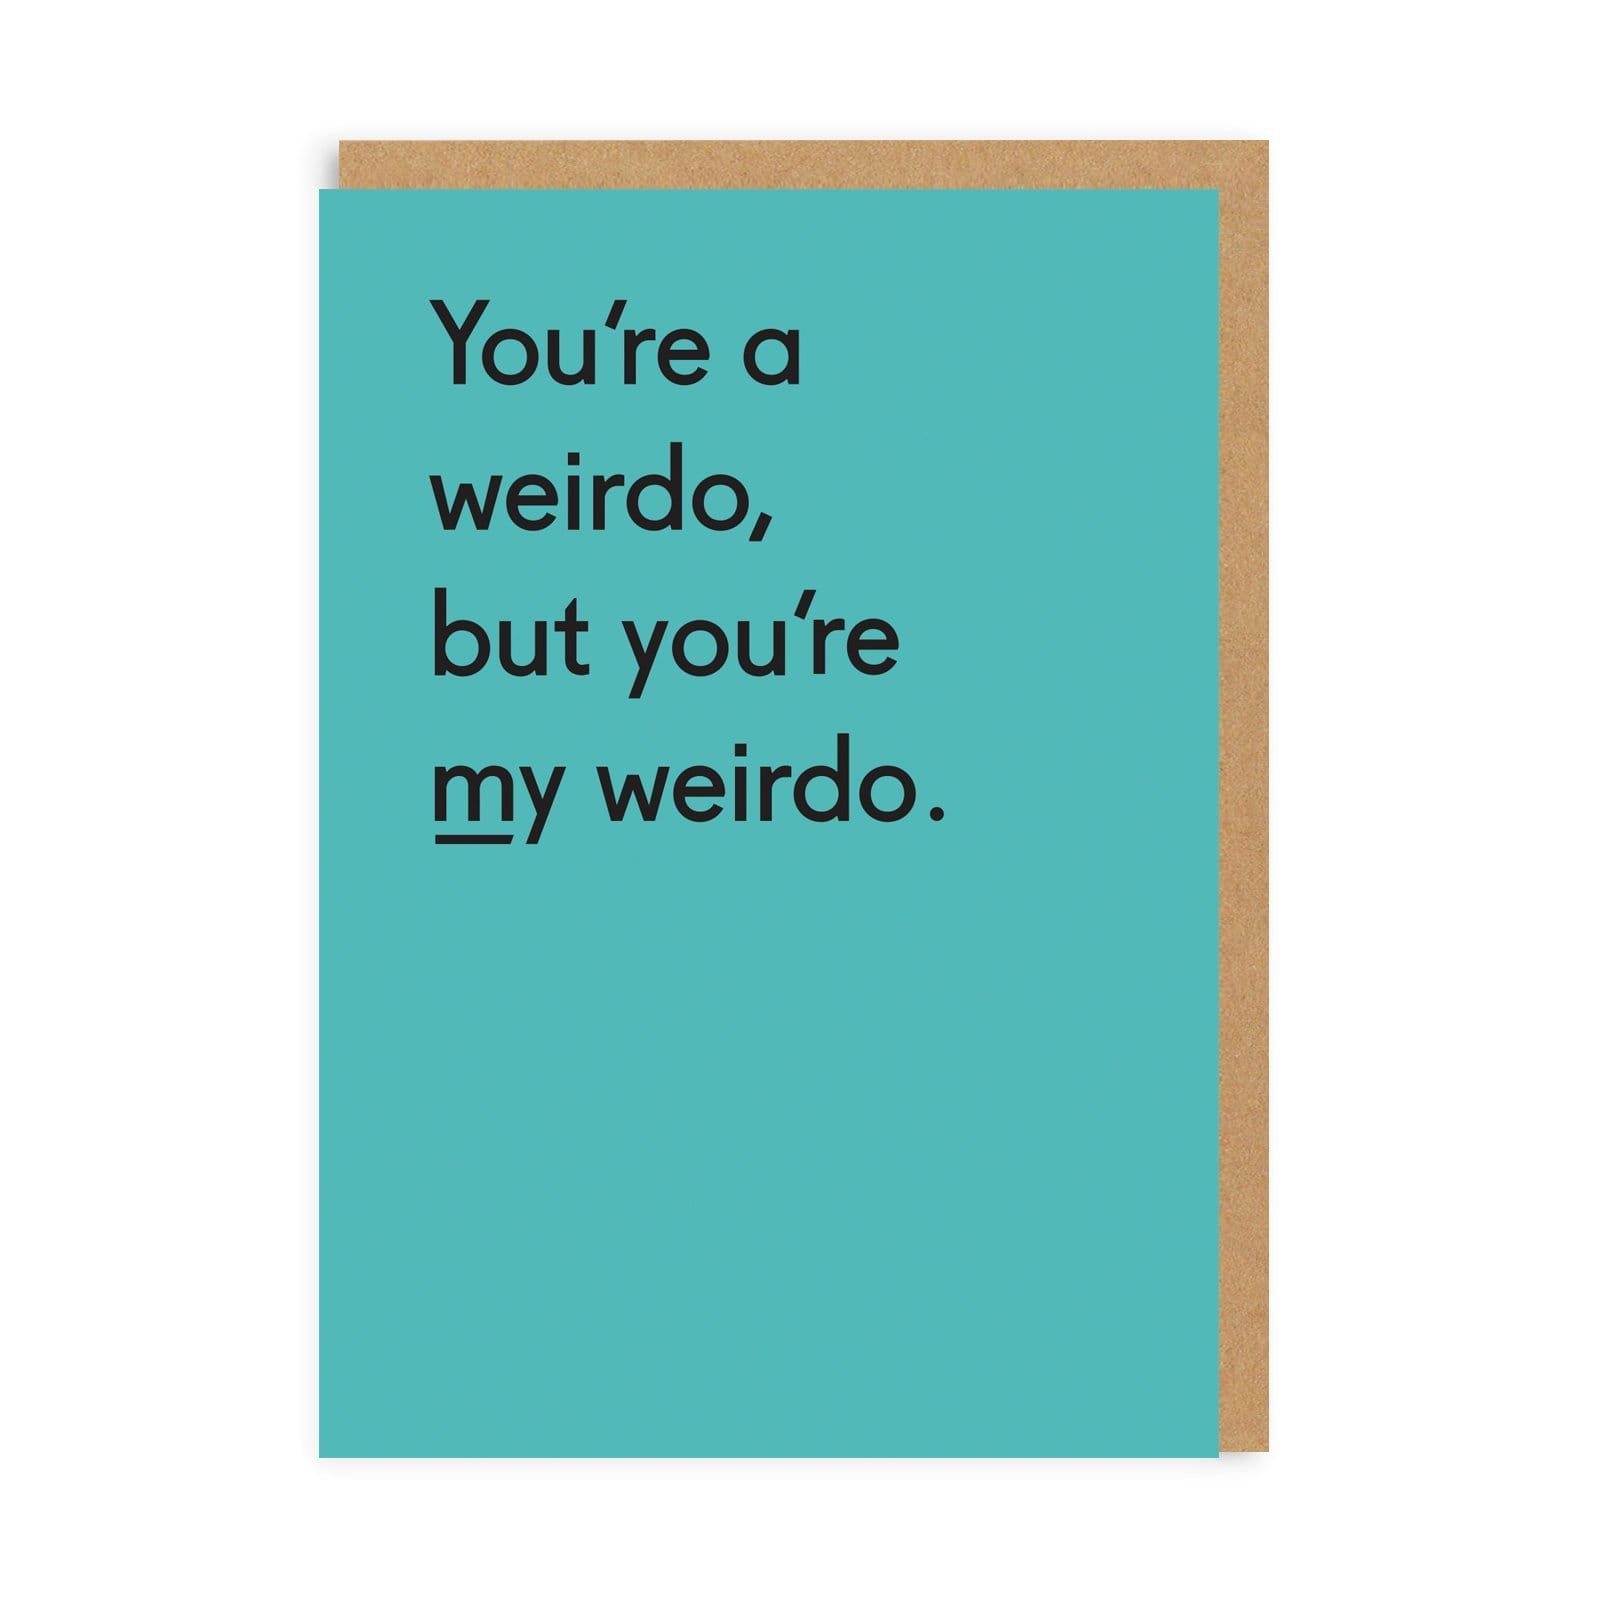 Valentine’s Day | Funny Valentines Card For Him or Her | You’re My Weirdo Greeting Card | Ohh Deer Unique Valentine’s Card | Artwork by Twin Pines | Made In The UK, Eco-Friendly Materials, Plastic Free Packaging